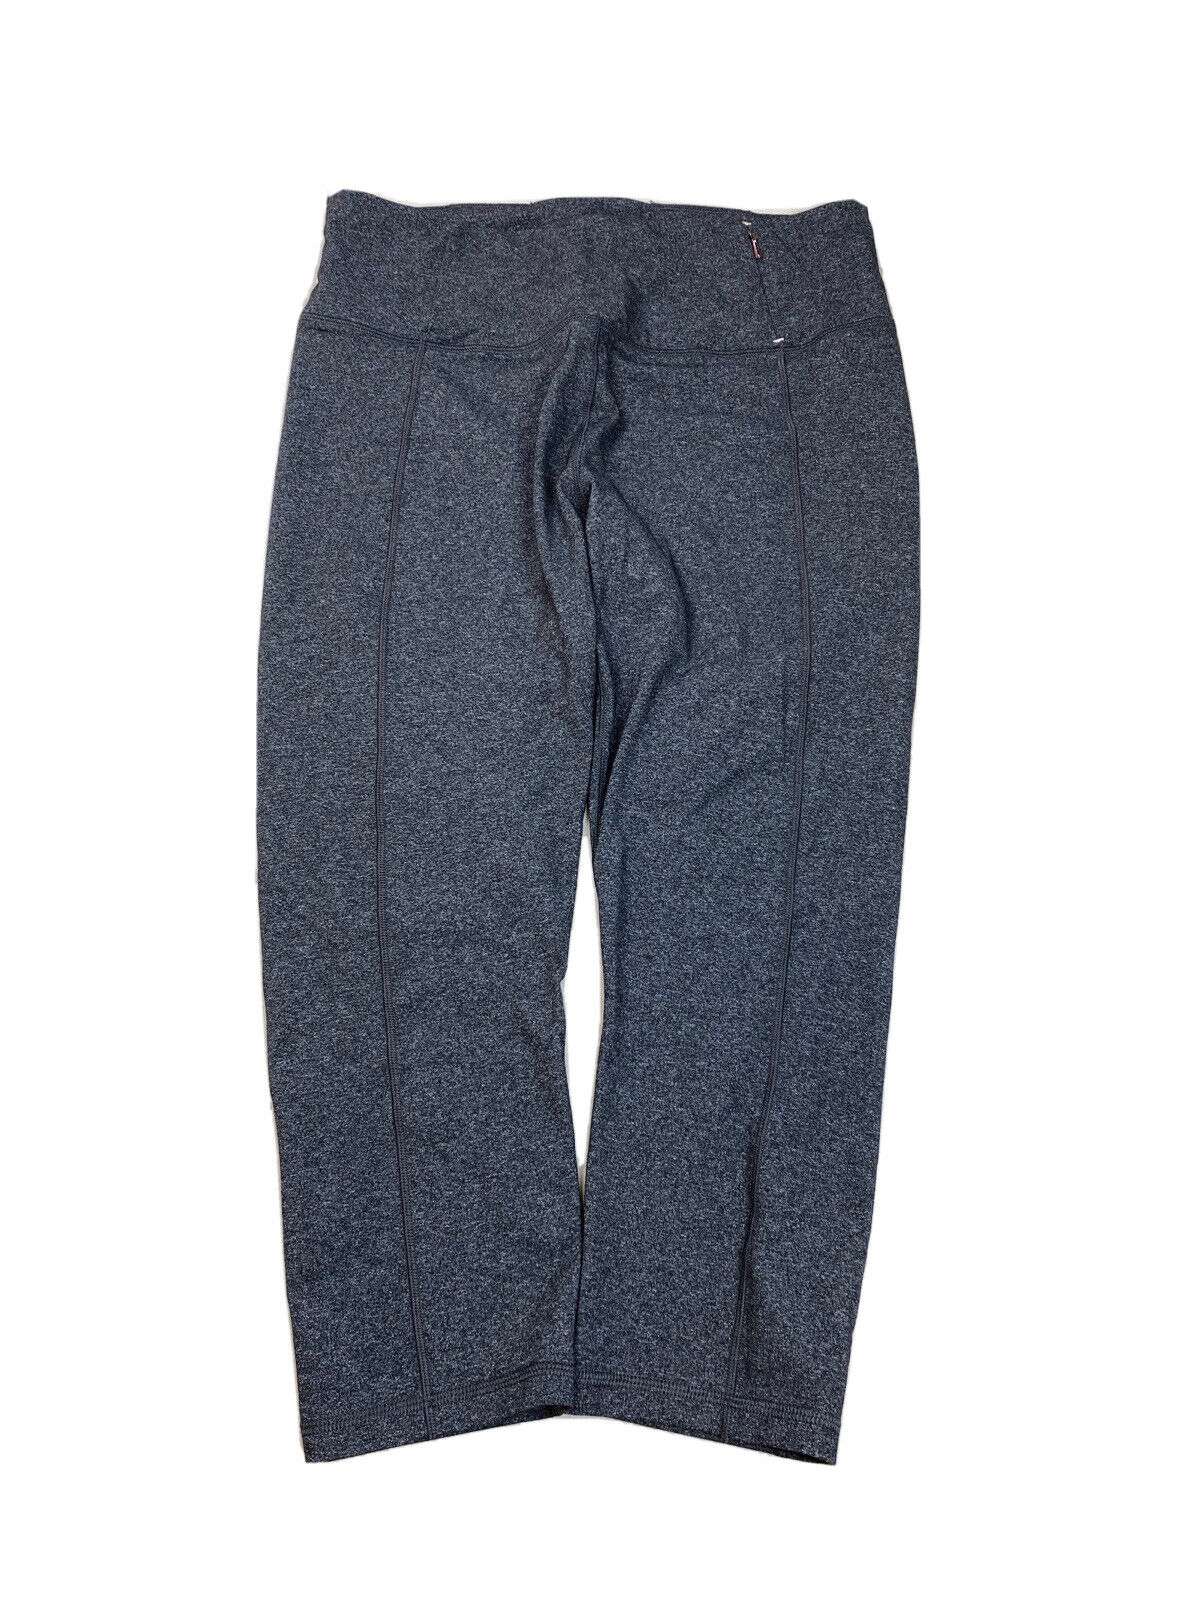 Calia Women's Gray Heathered Cropped Athletic Leggings - L – The Resell Club